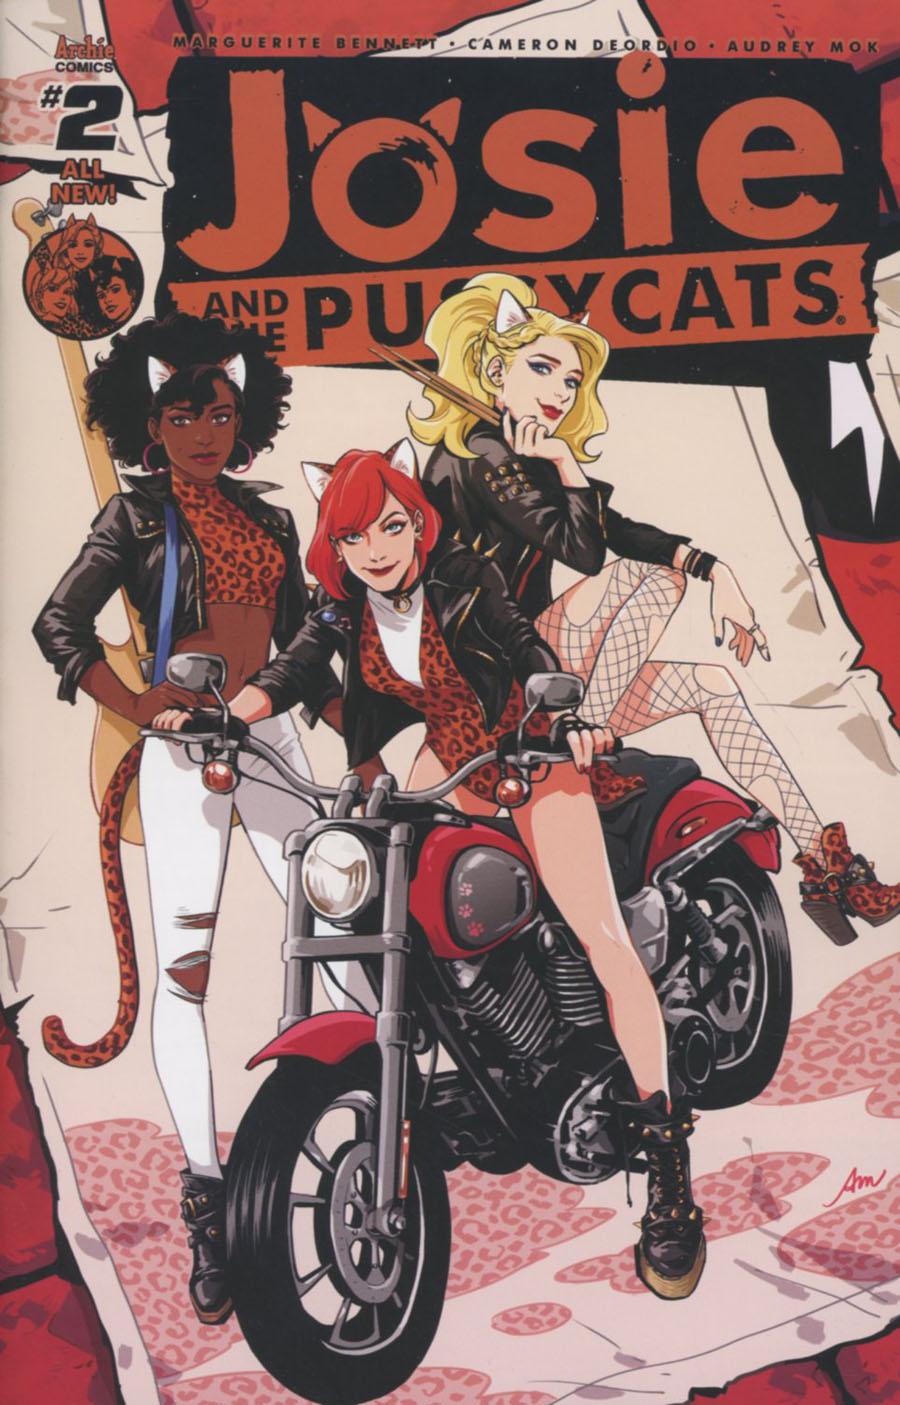 Josie And The Pussycats Vol. 2 #2